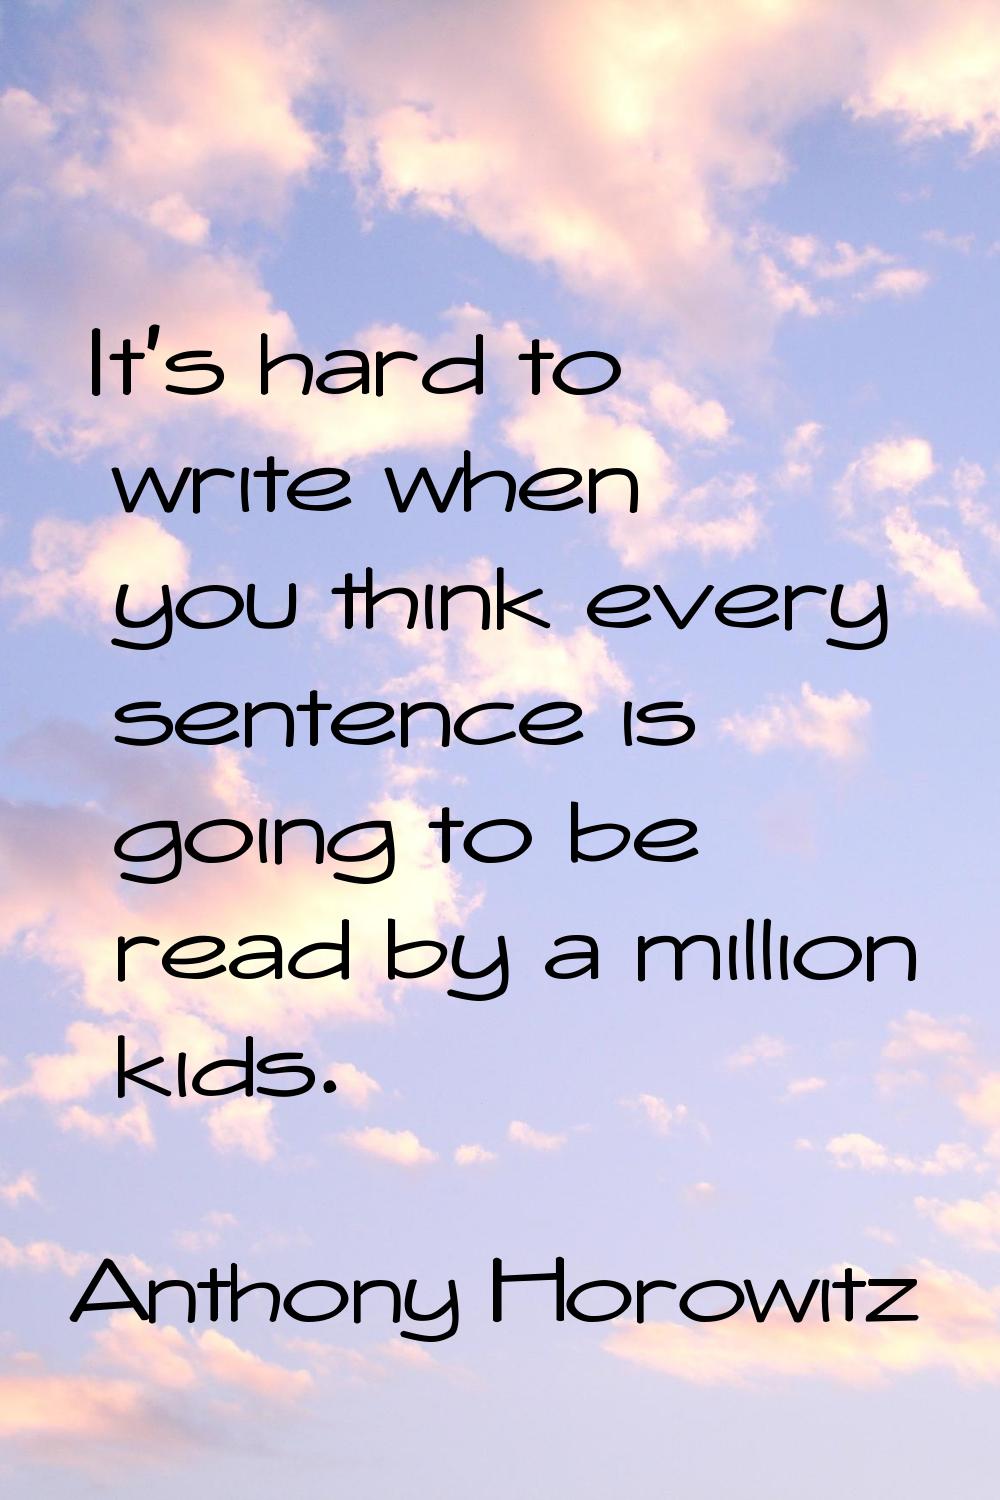 It's hard to write when you think every sentence is going to be read by a million kids.